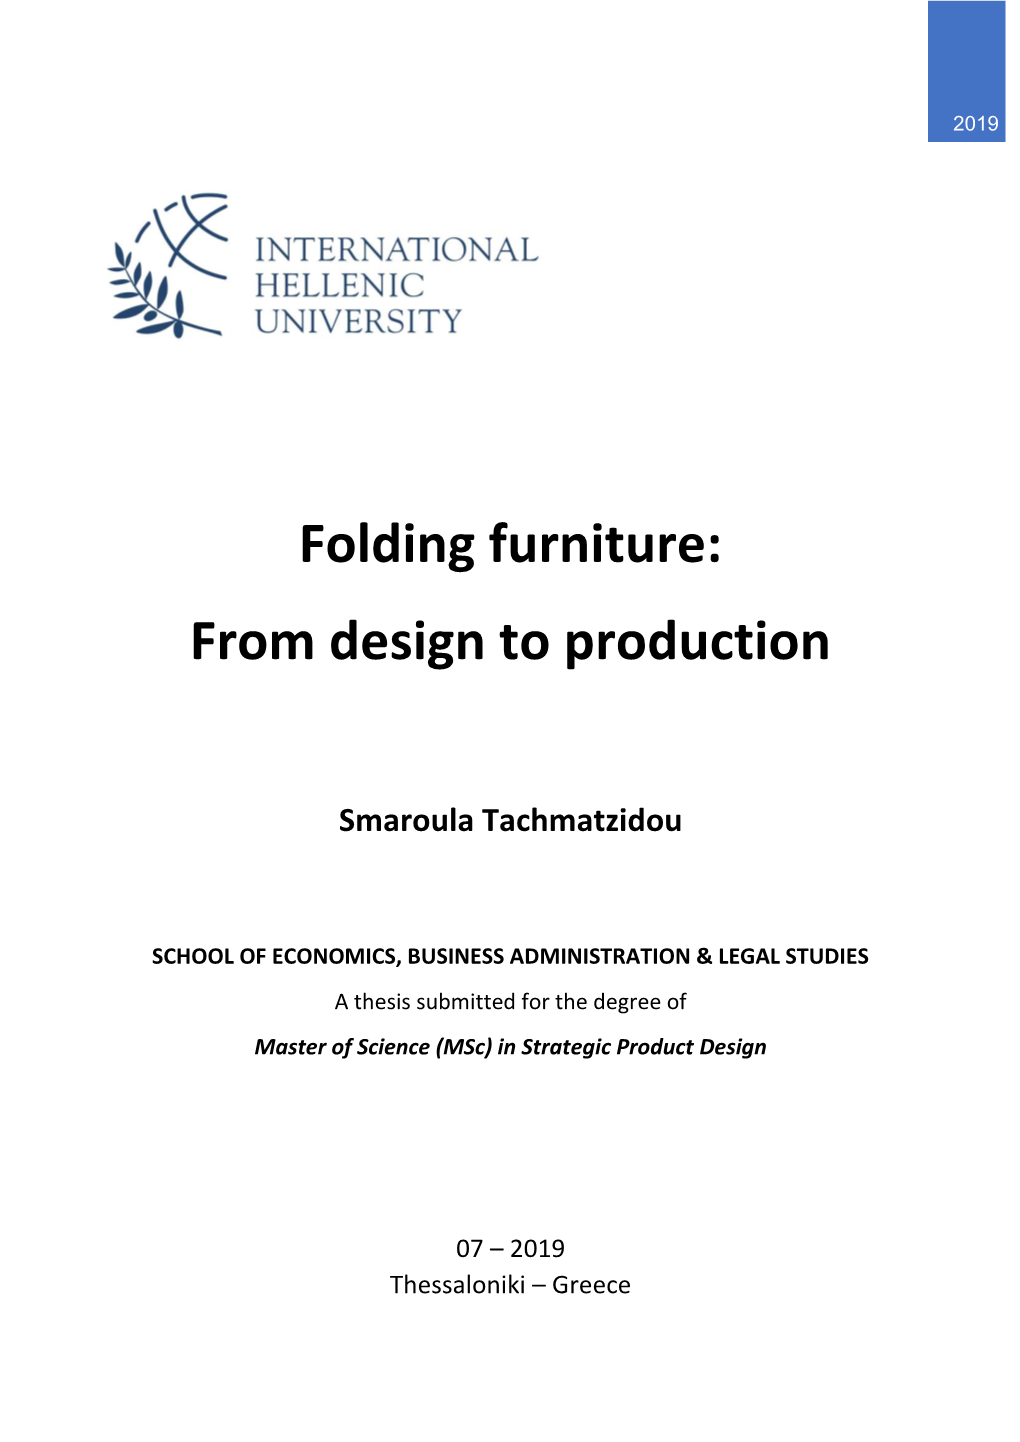 Folding Furniture: from Design to Production